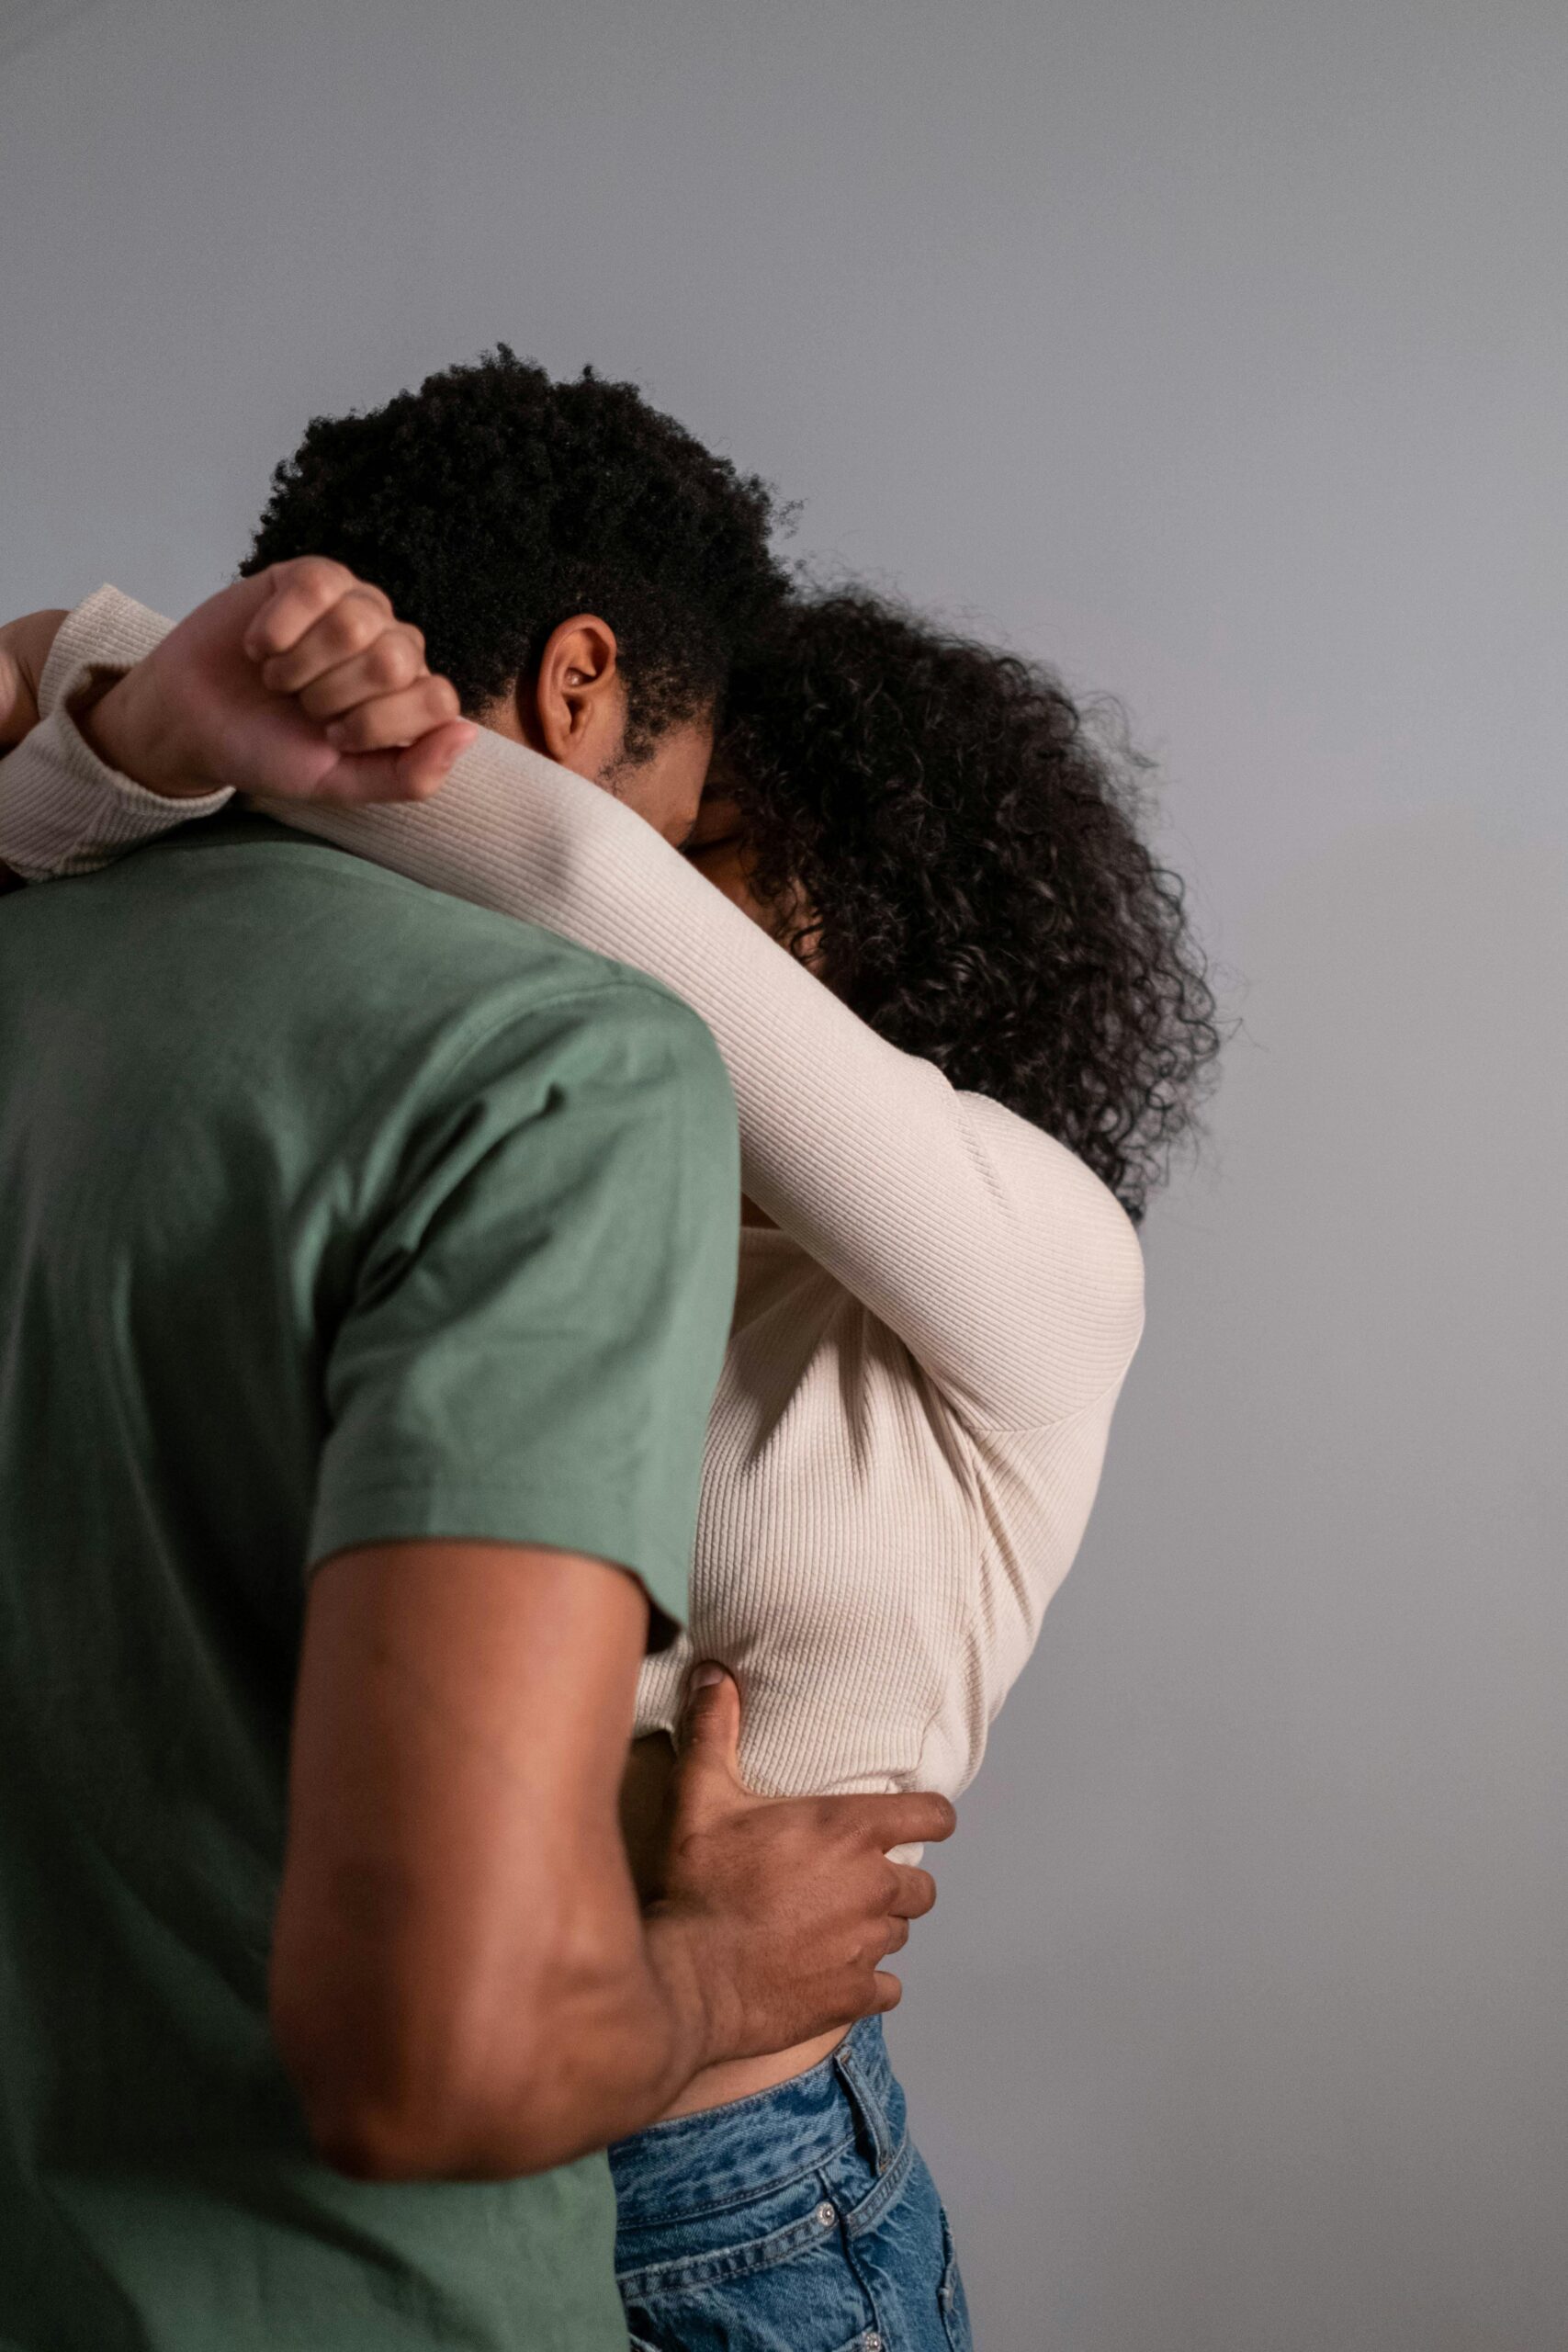 Nurturing Intimacy: Tips for Enhancing Emotional and Physical Connection